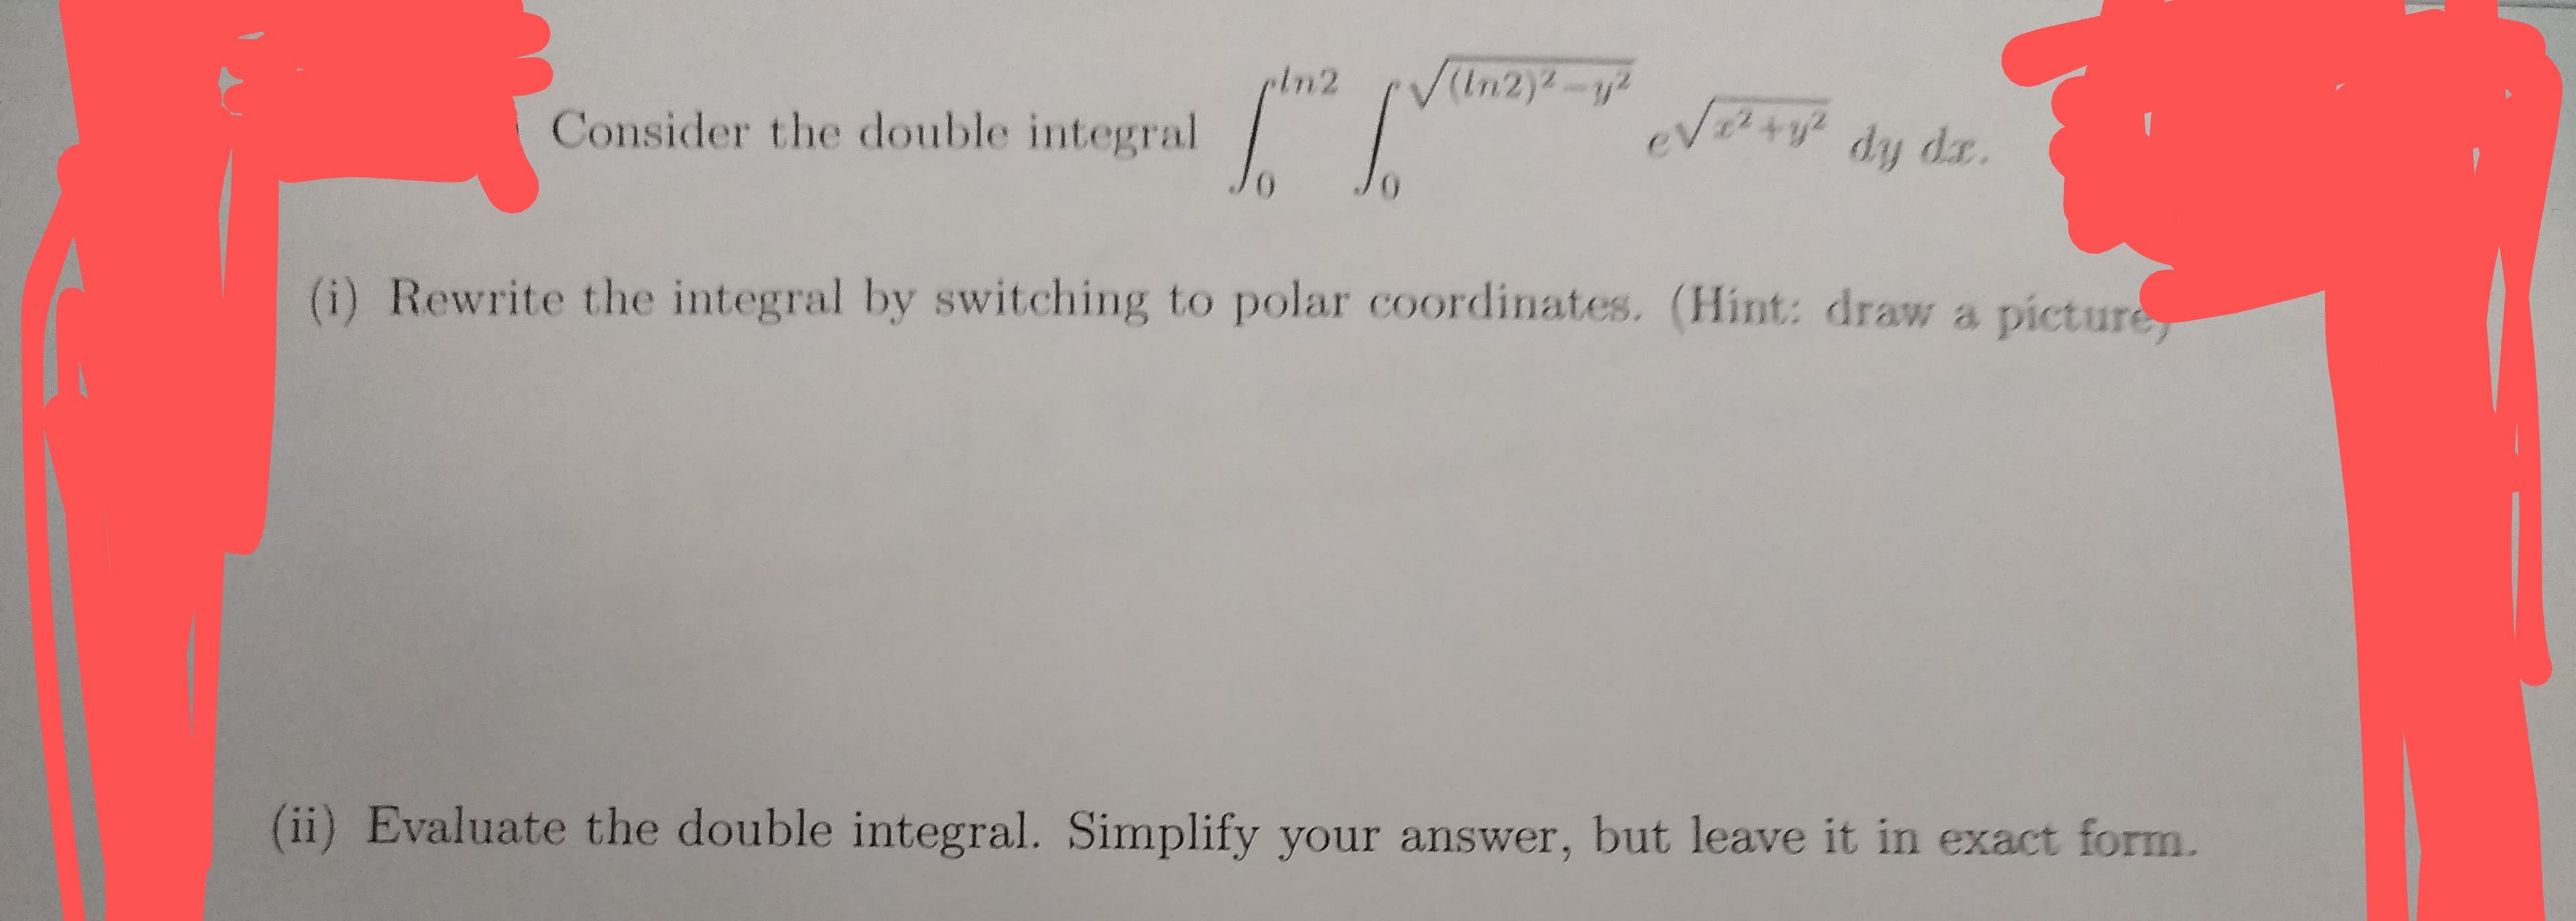 In2
VIn2)-y
Vty dy da.
Consider the double integral
(i) Rewrite the integral by switching to polar coordinates. (Hint: draw a picture
(ii) Evaluate the double integral. Simplify your answer, but leave it in exact form.
